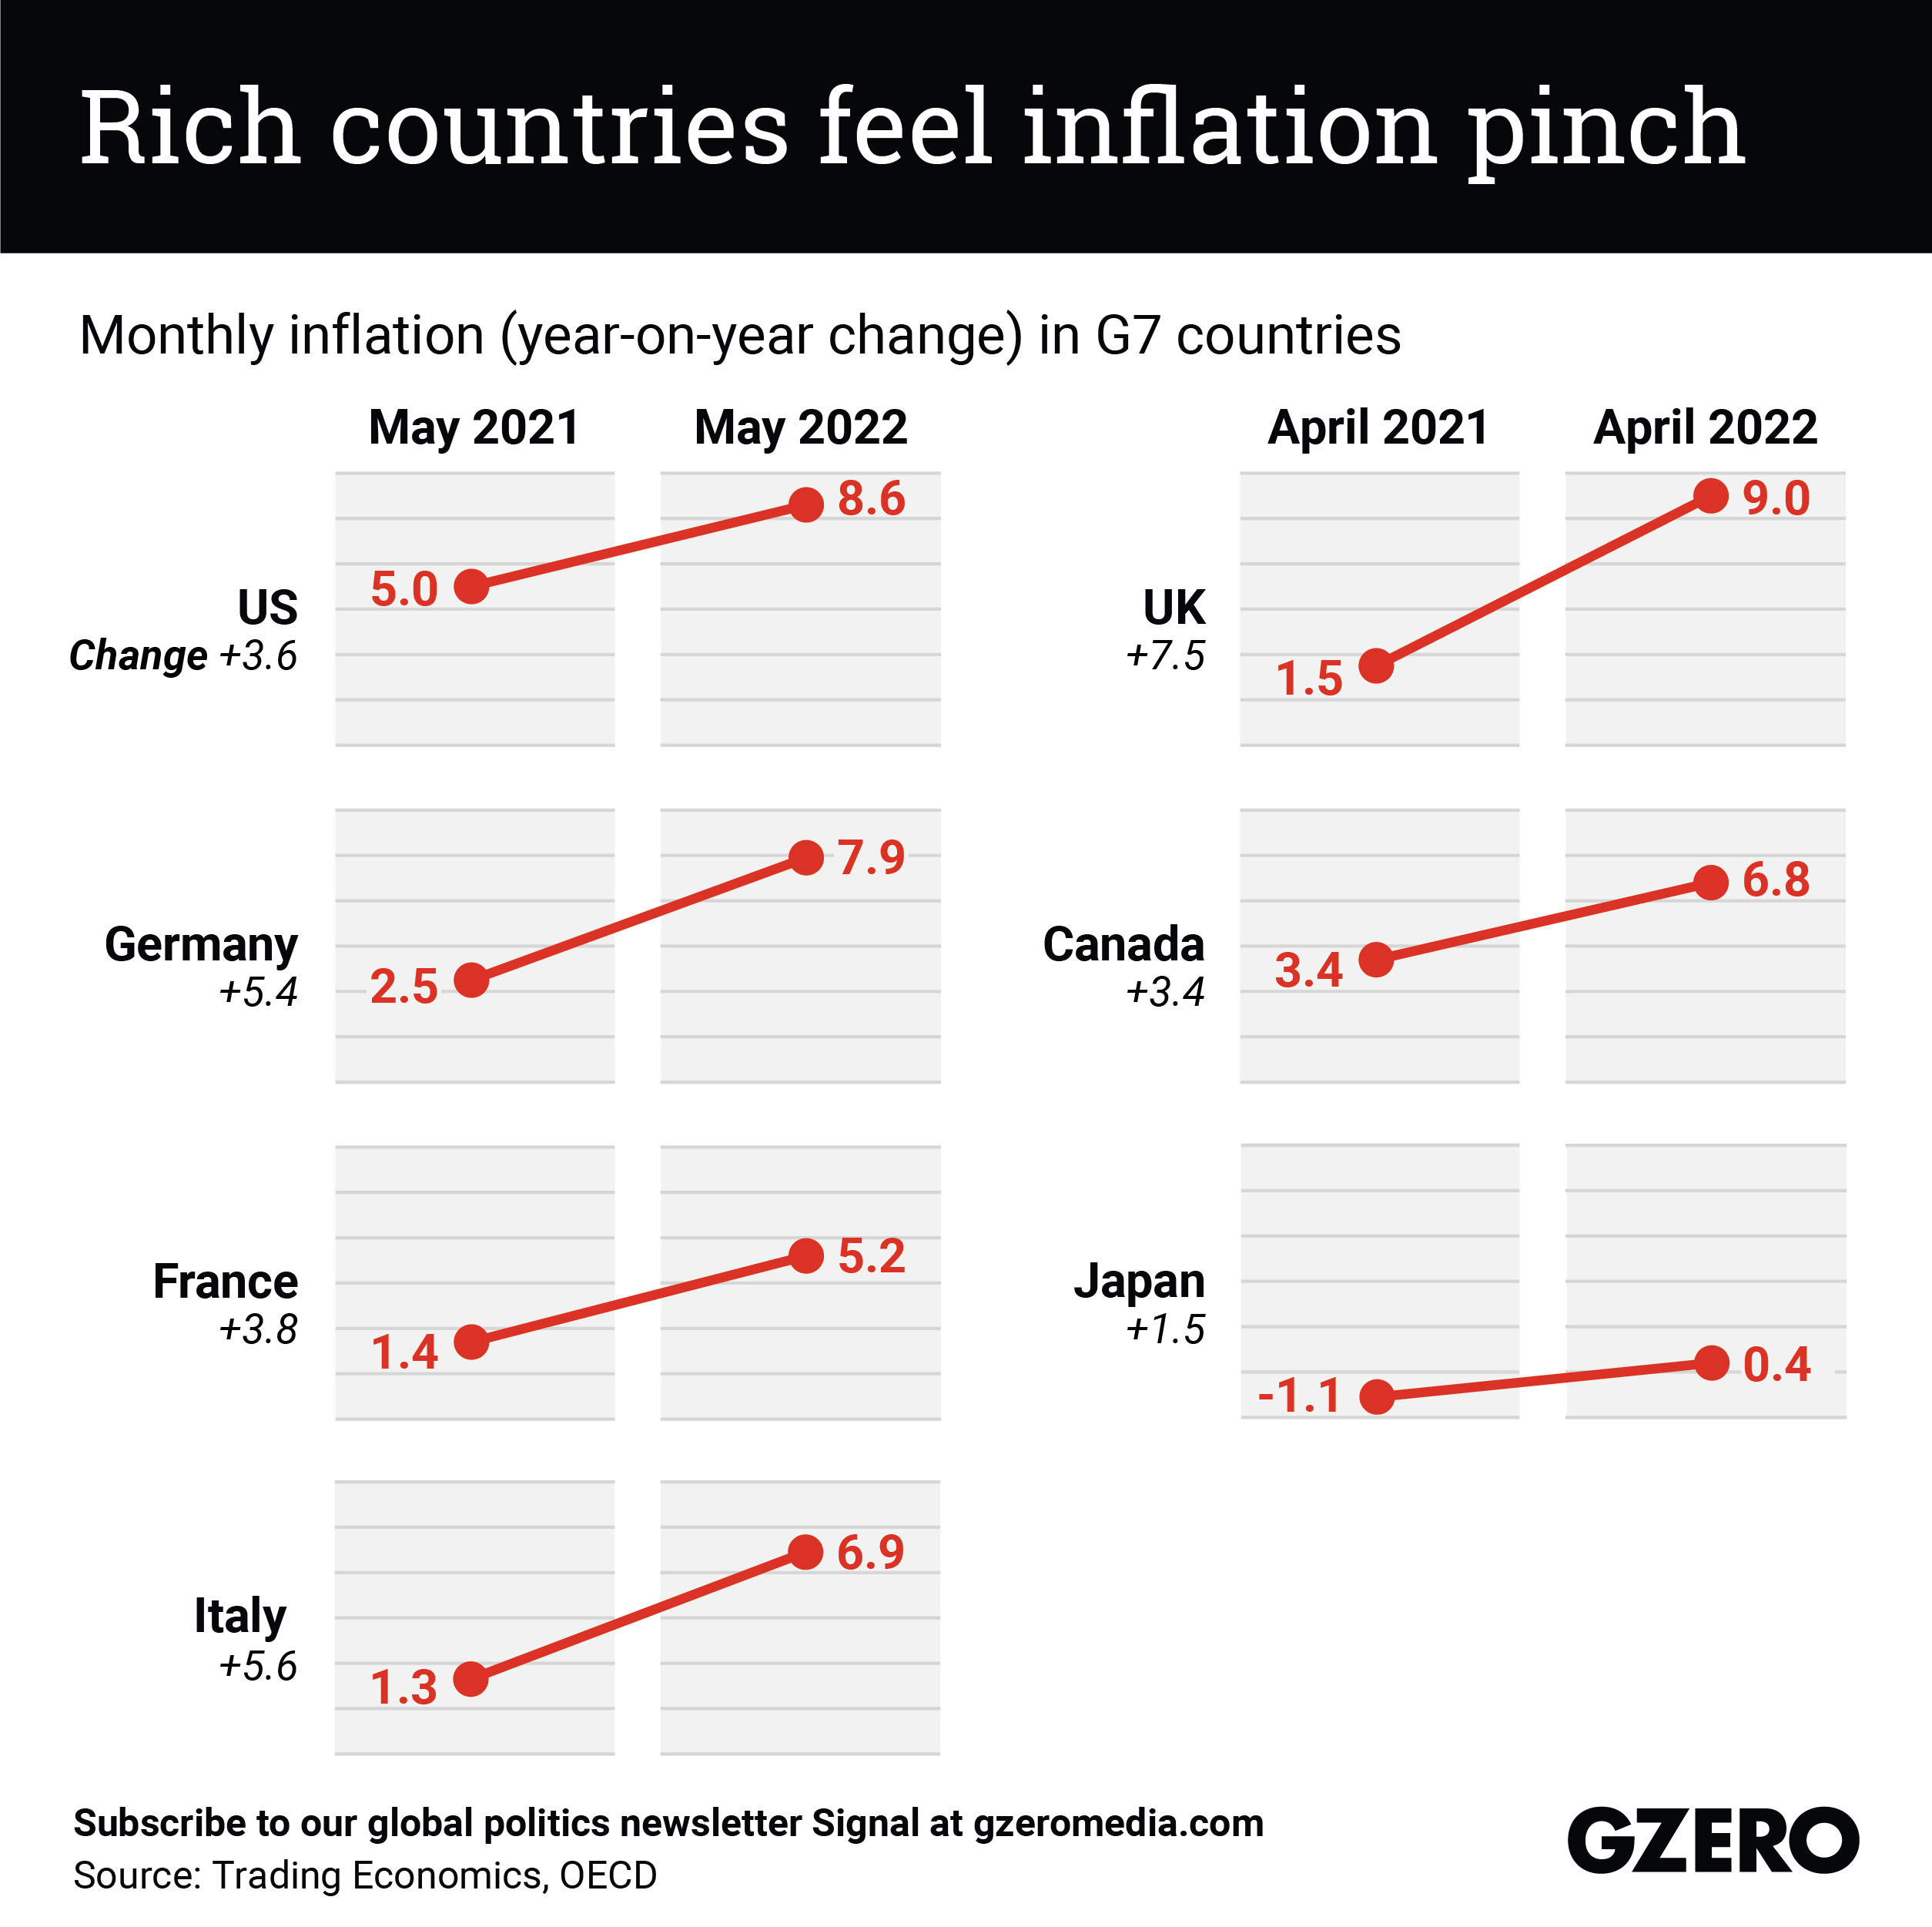 The Graphic Truth: Rich countries feel inflation pinch